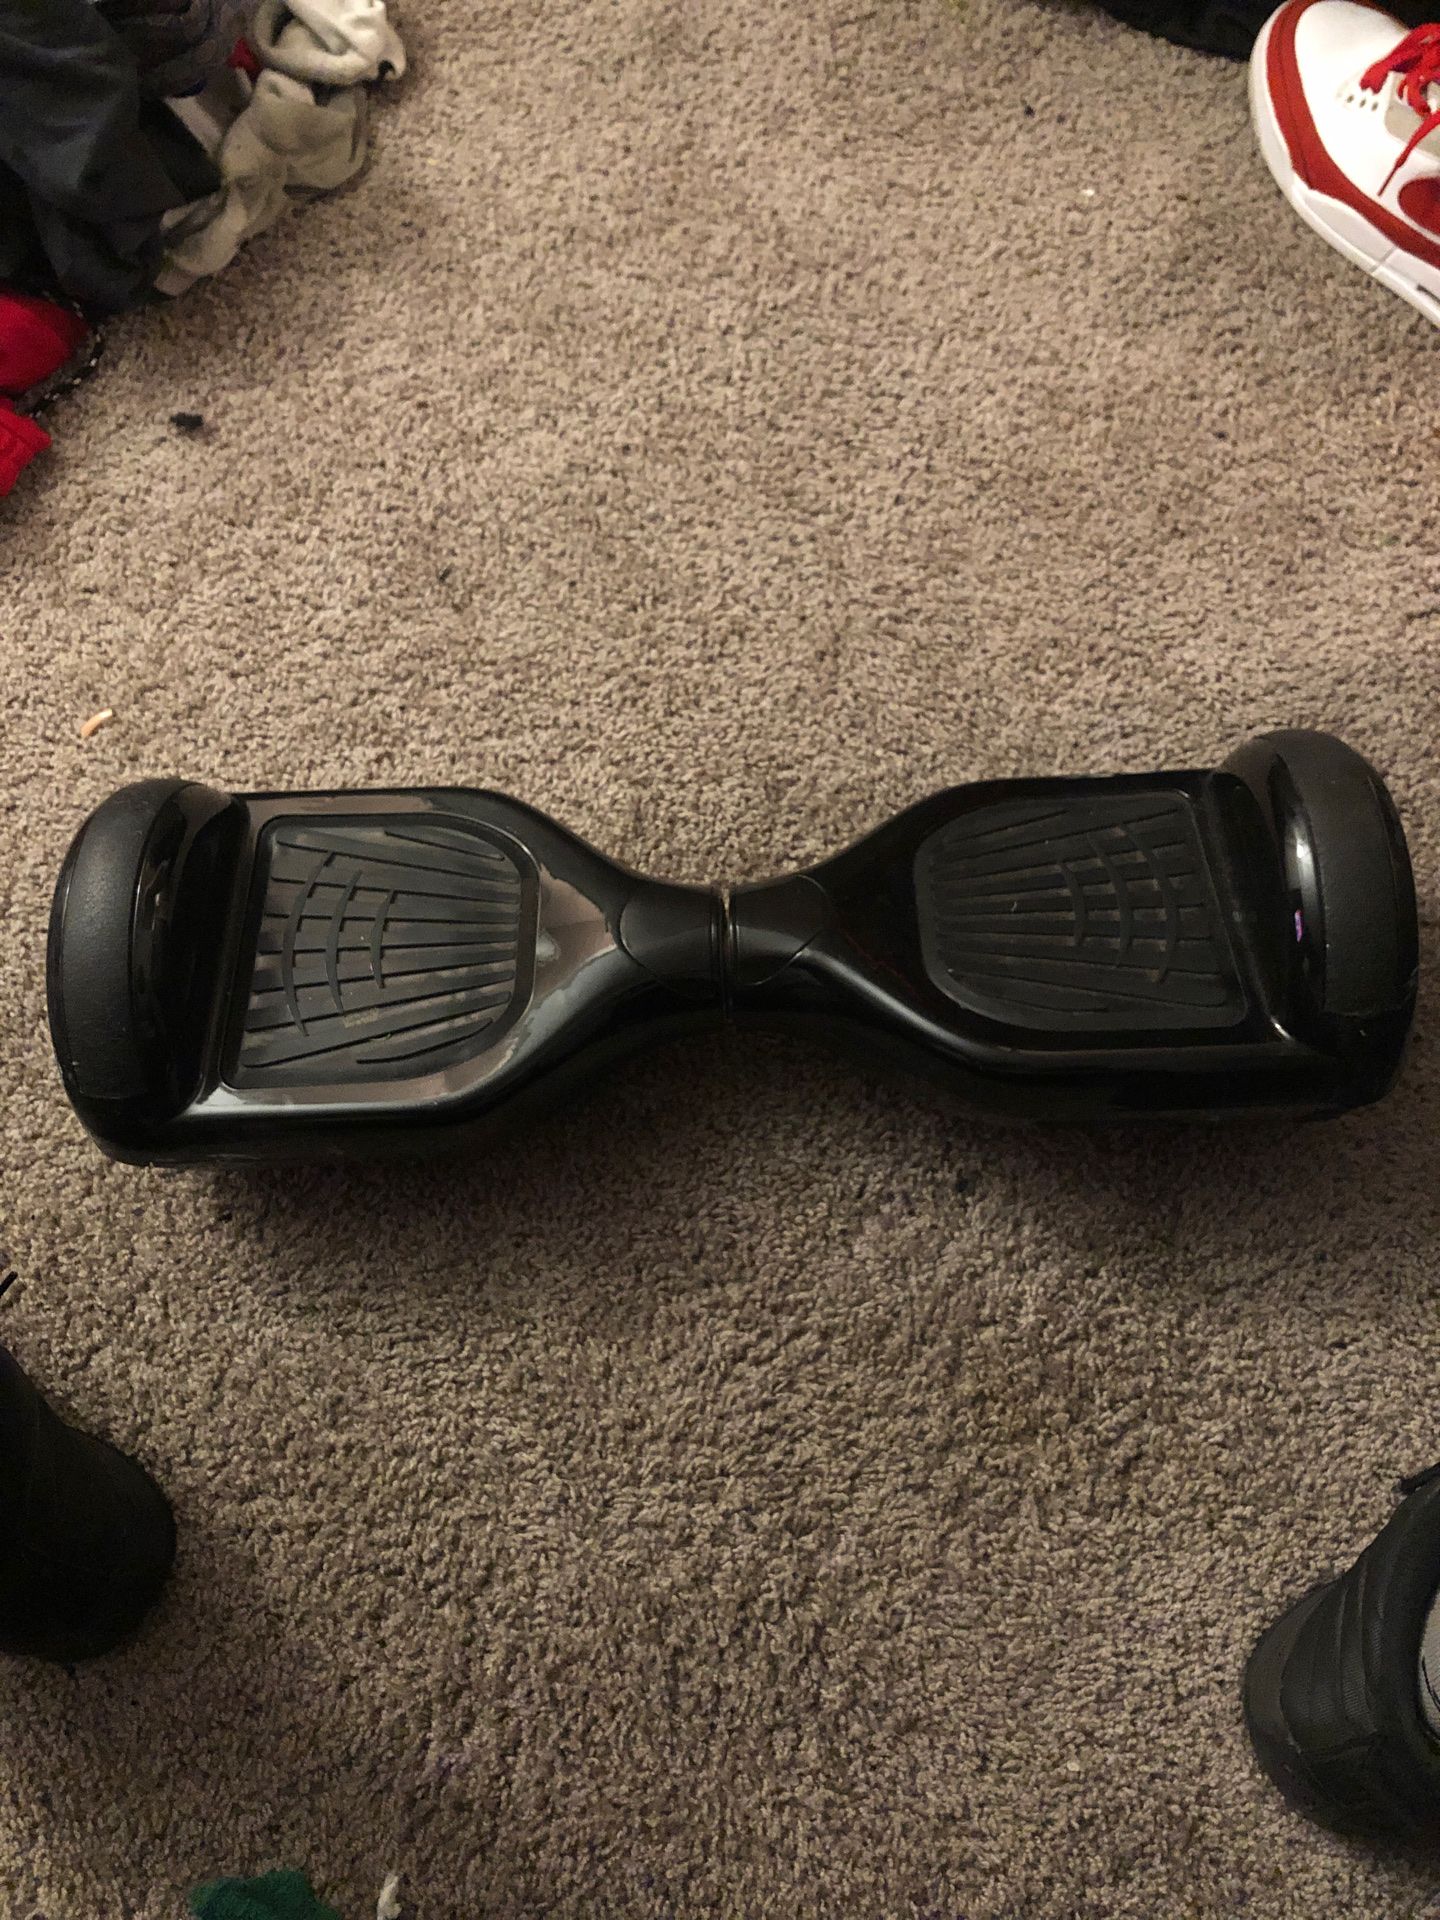 Hoverboard need gone ASAP!!!